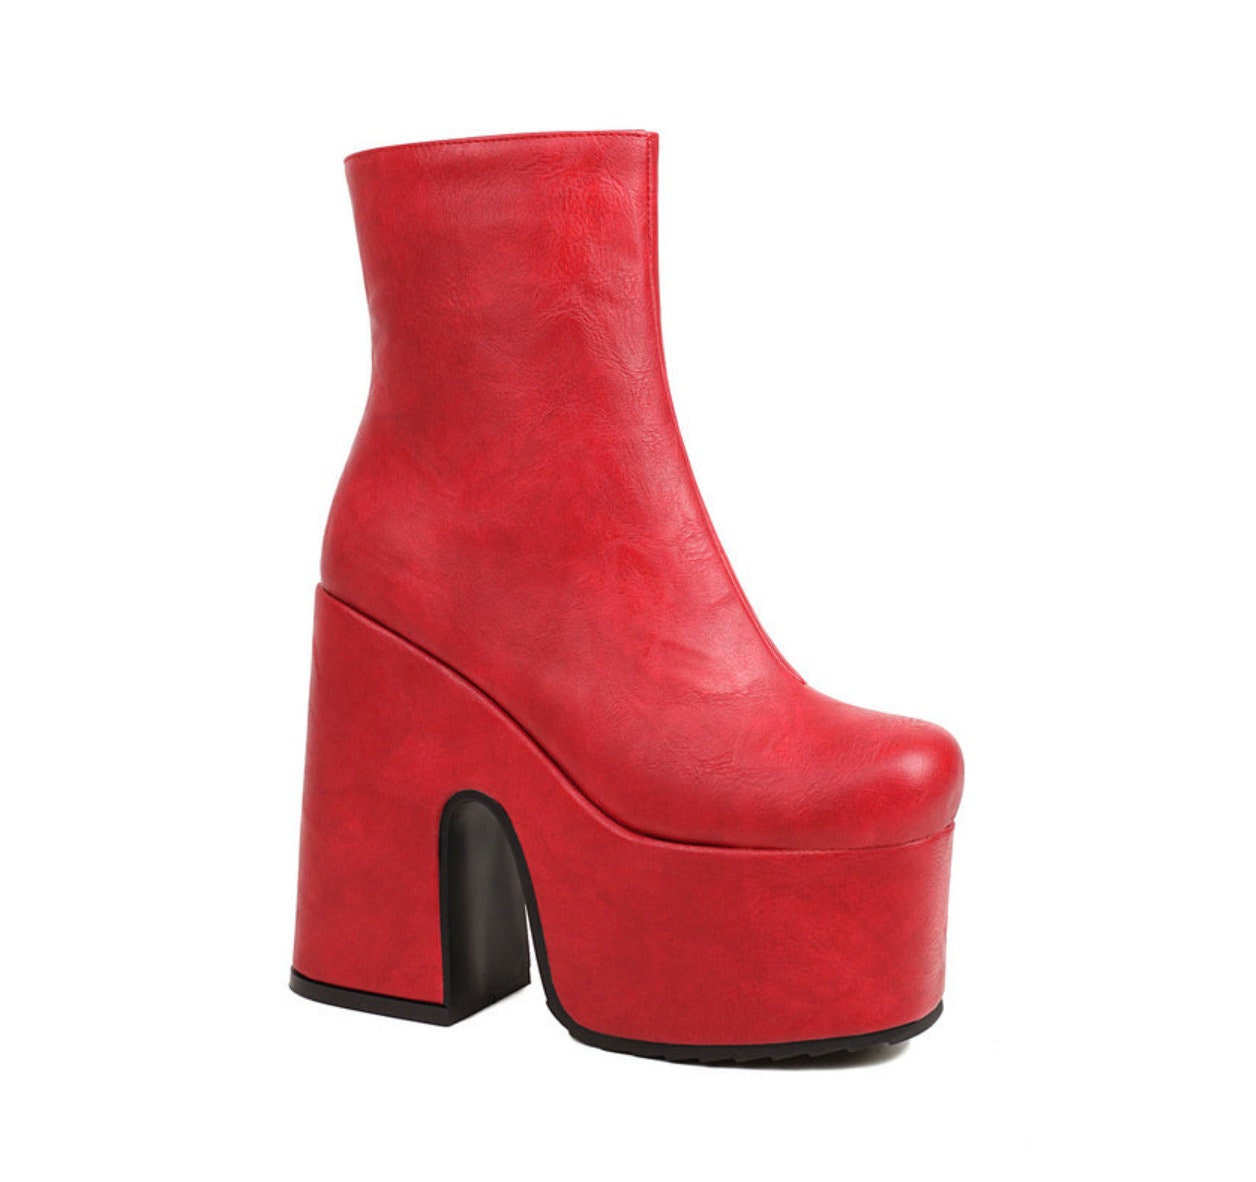 Red Faux Leather Gothic Ankle Boots with Side Zipper - Y2K Fashion